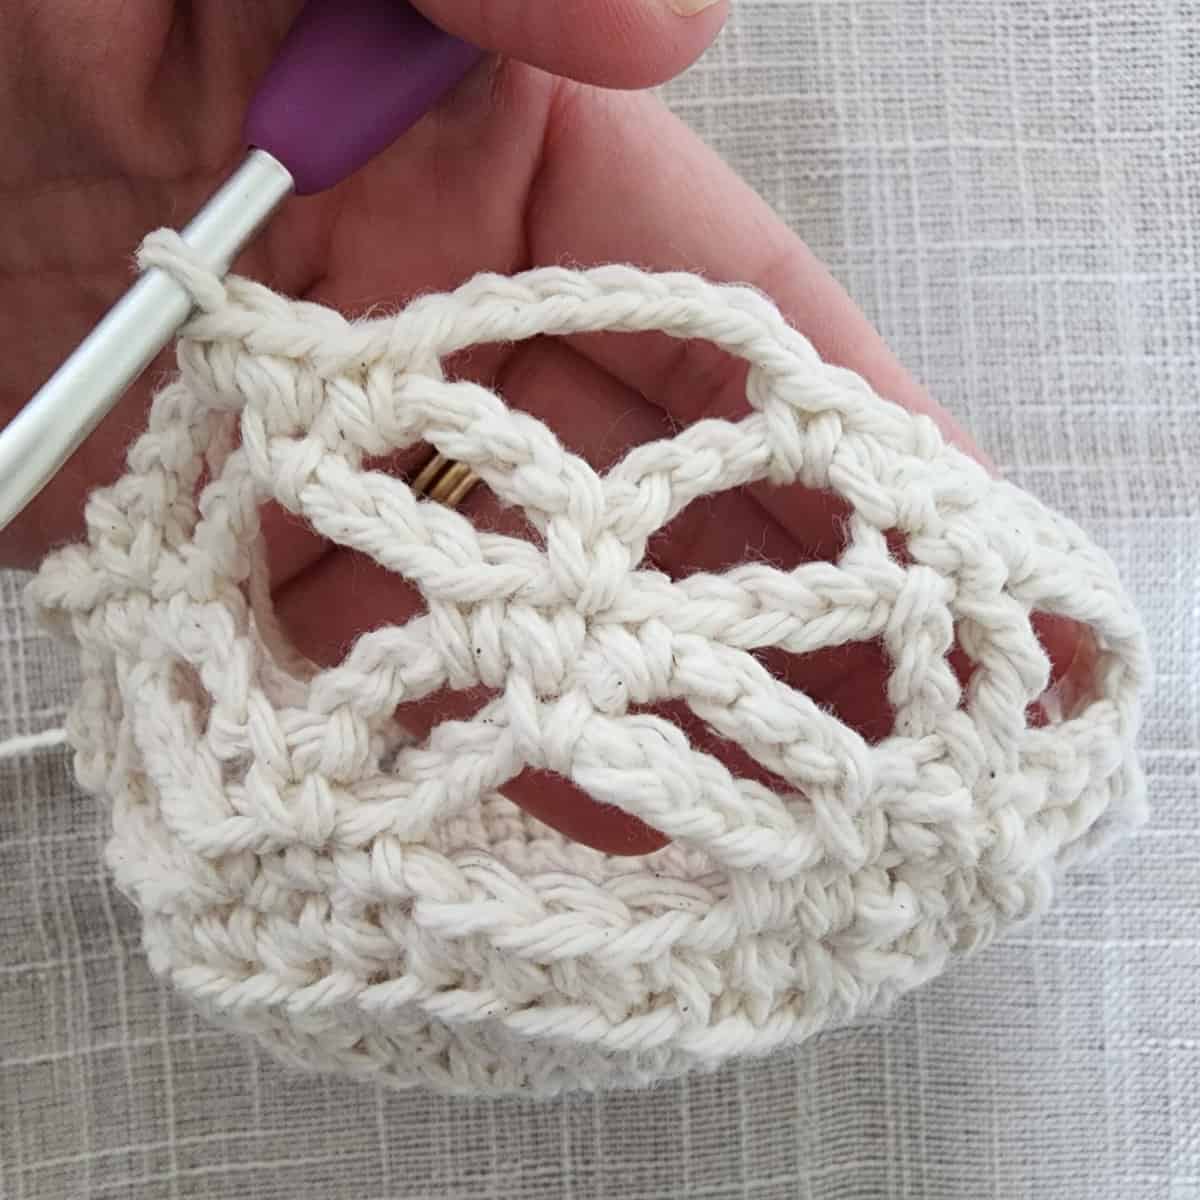 Crochet lace worked onto circle to form crochet plant hanger basket.